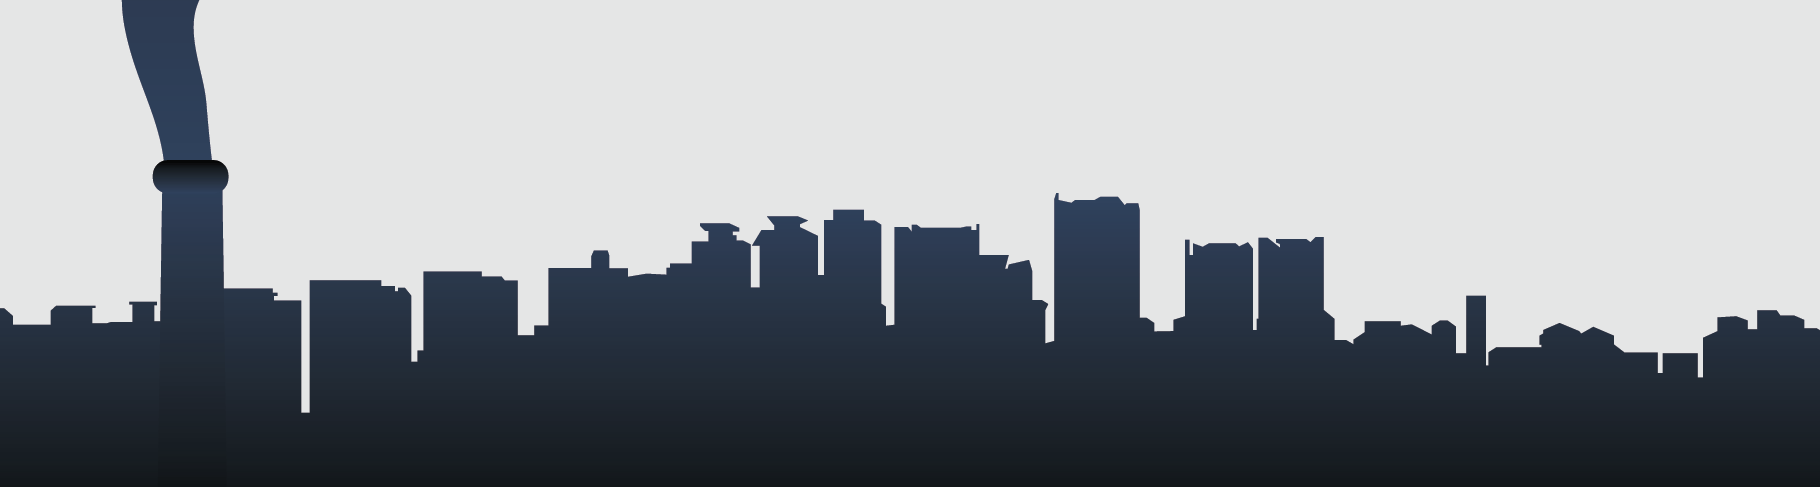 vector graphic of building skyline with air pollution